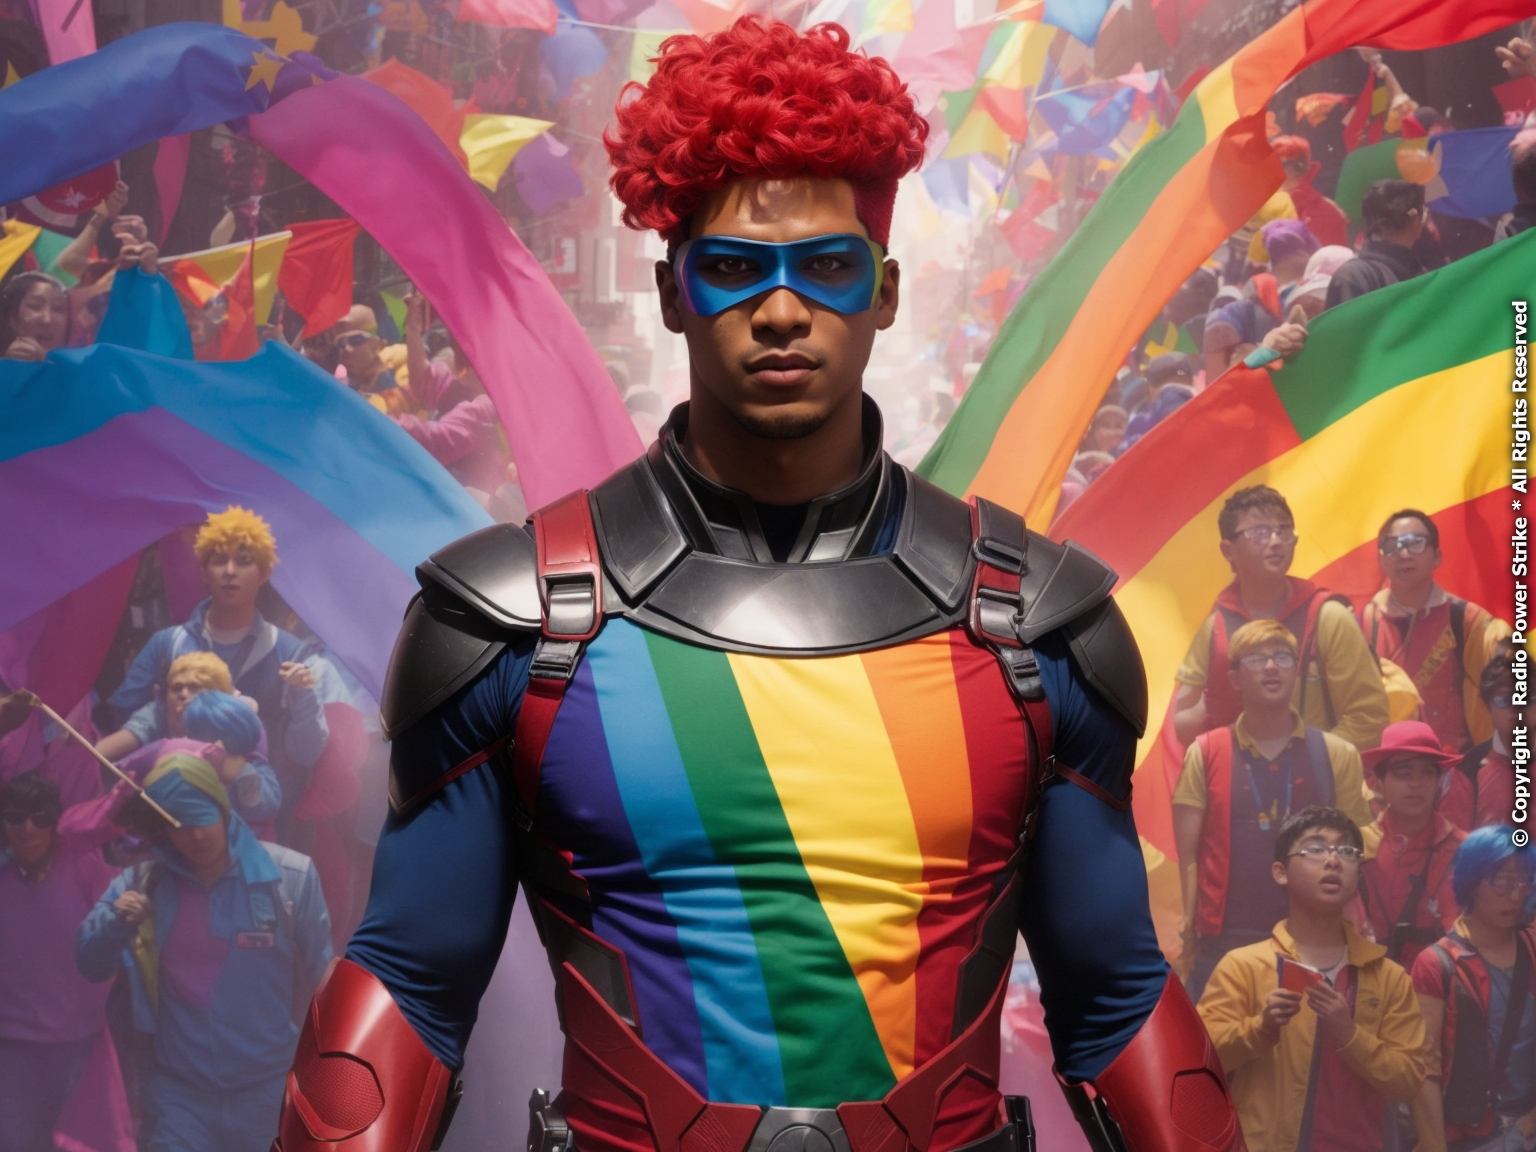 Cosplaying with Pride: Celebrating Queer Identity in Fandom